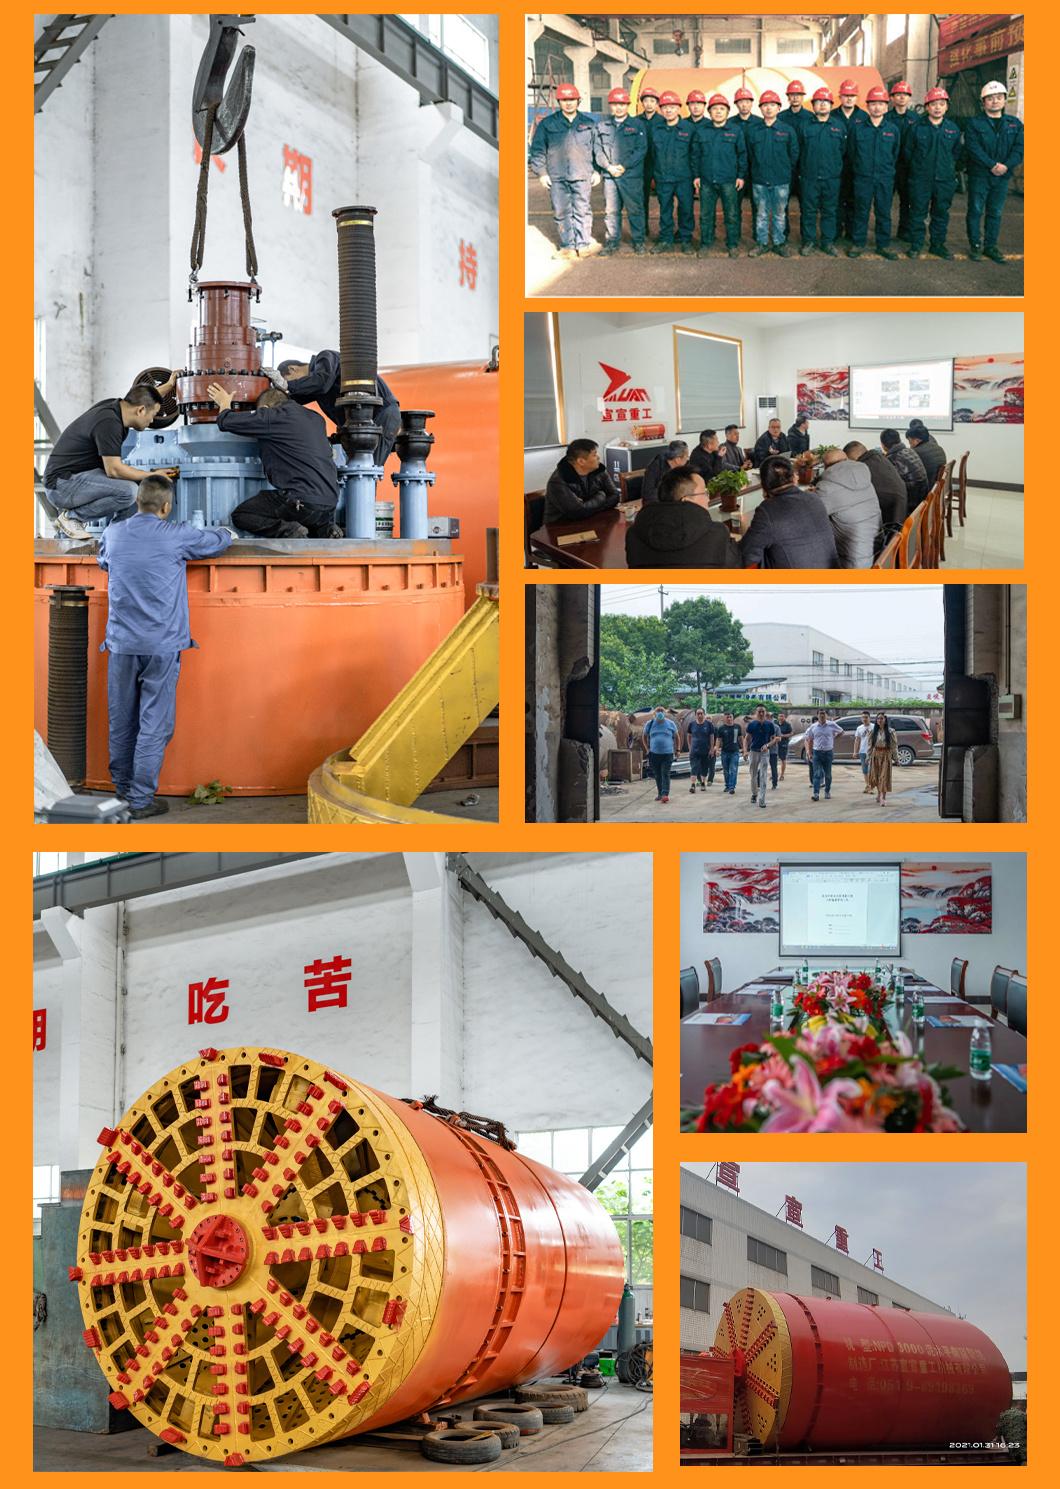 Slurry Compound Balance Pipe Jacking Tunneling Boring Machine for Soft Soil Rcc Ms Pipeline